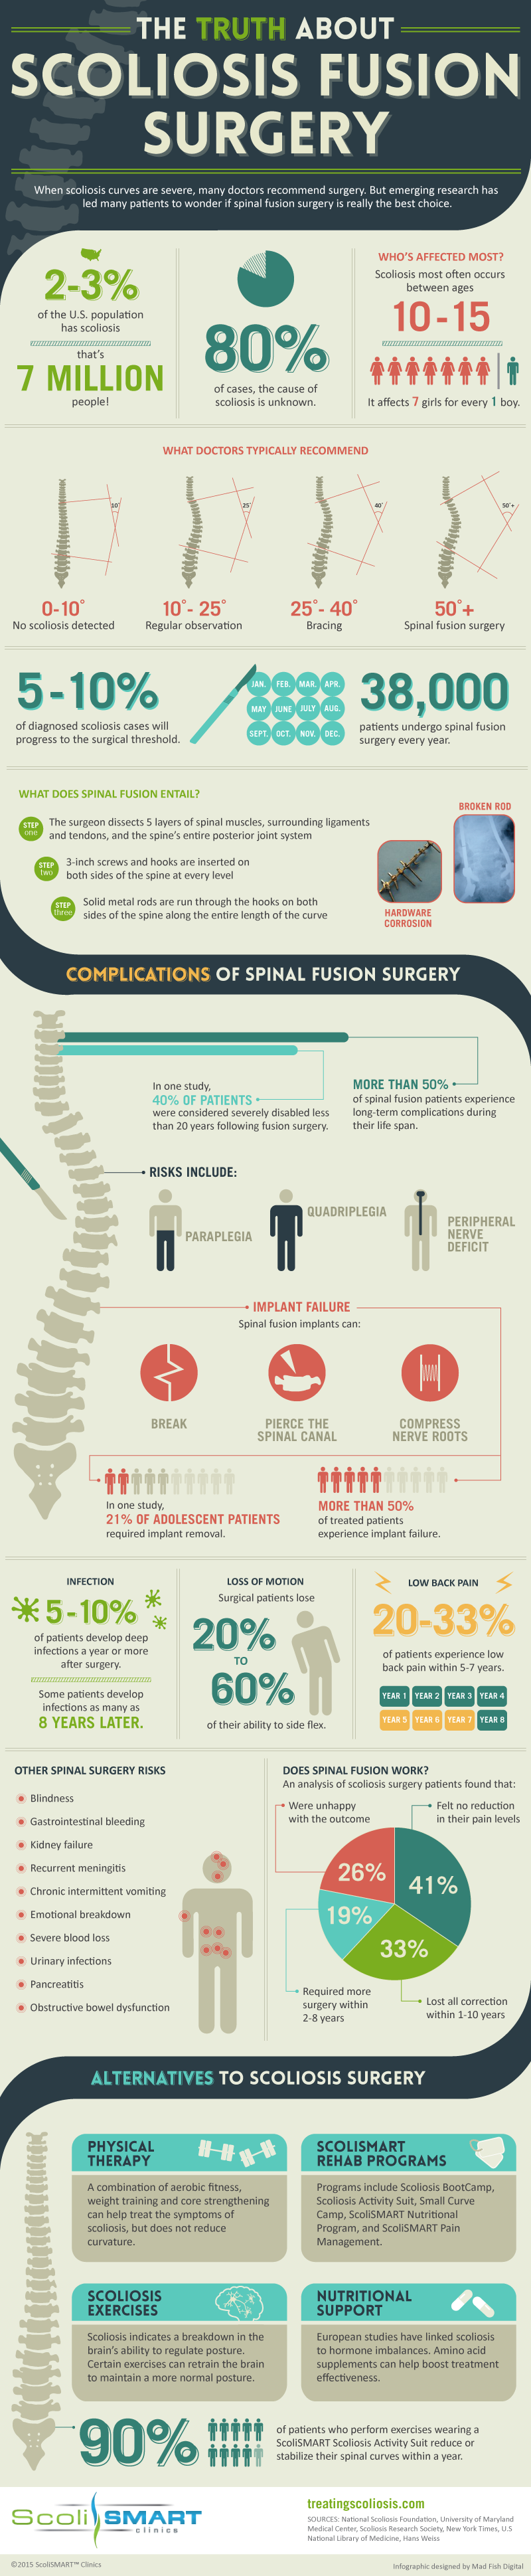 The Truth About Scoliosis Fusion Surgery